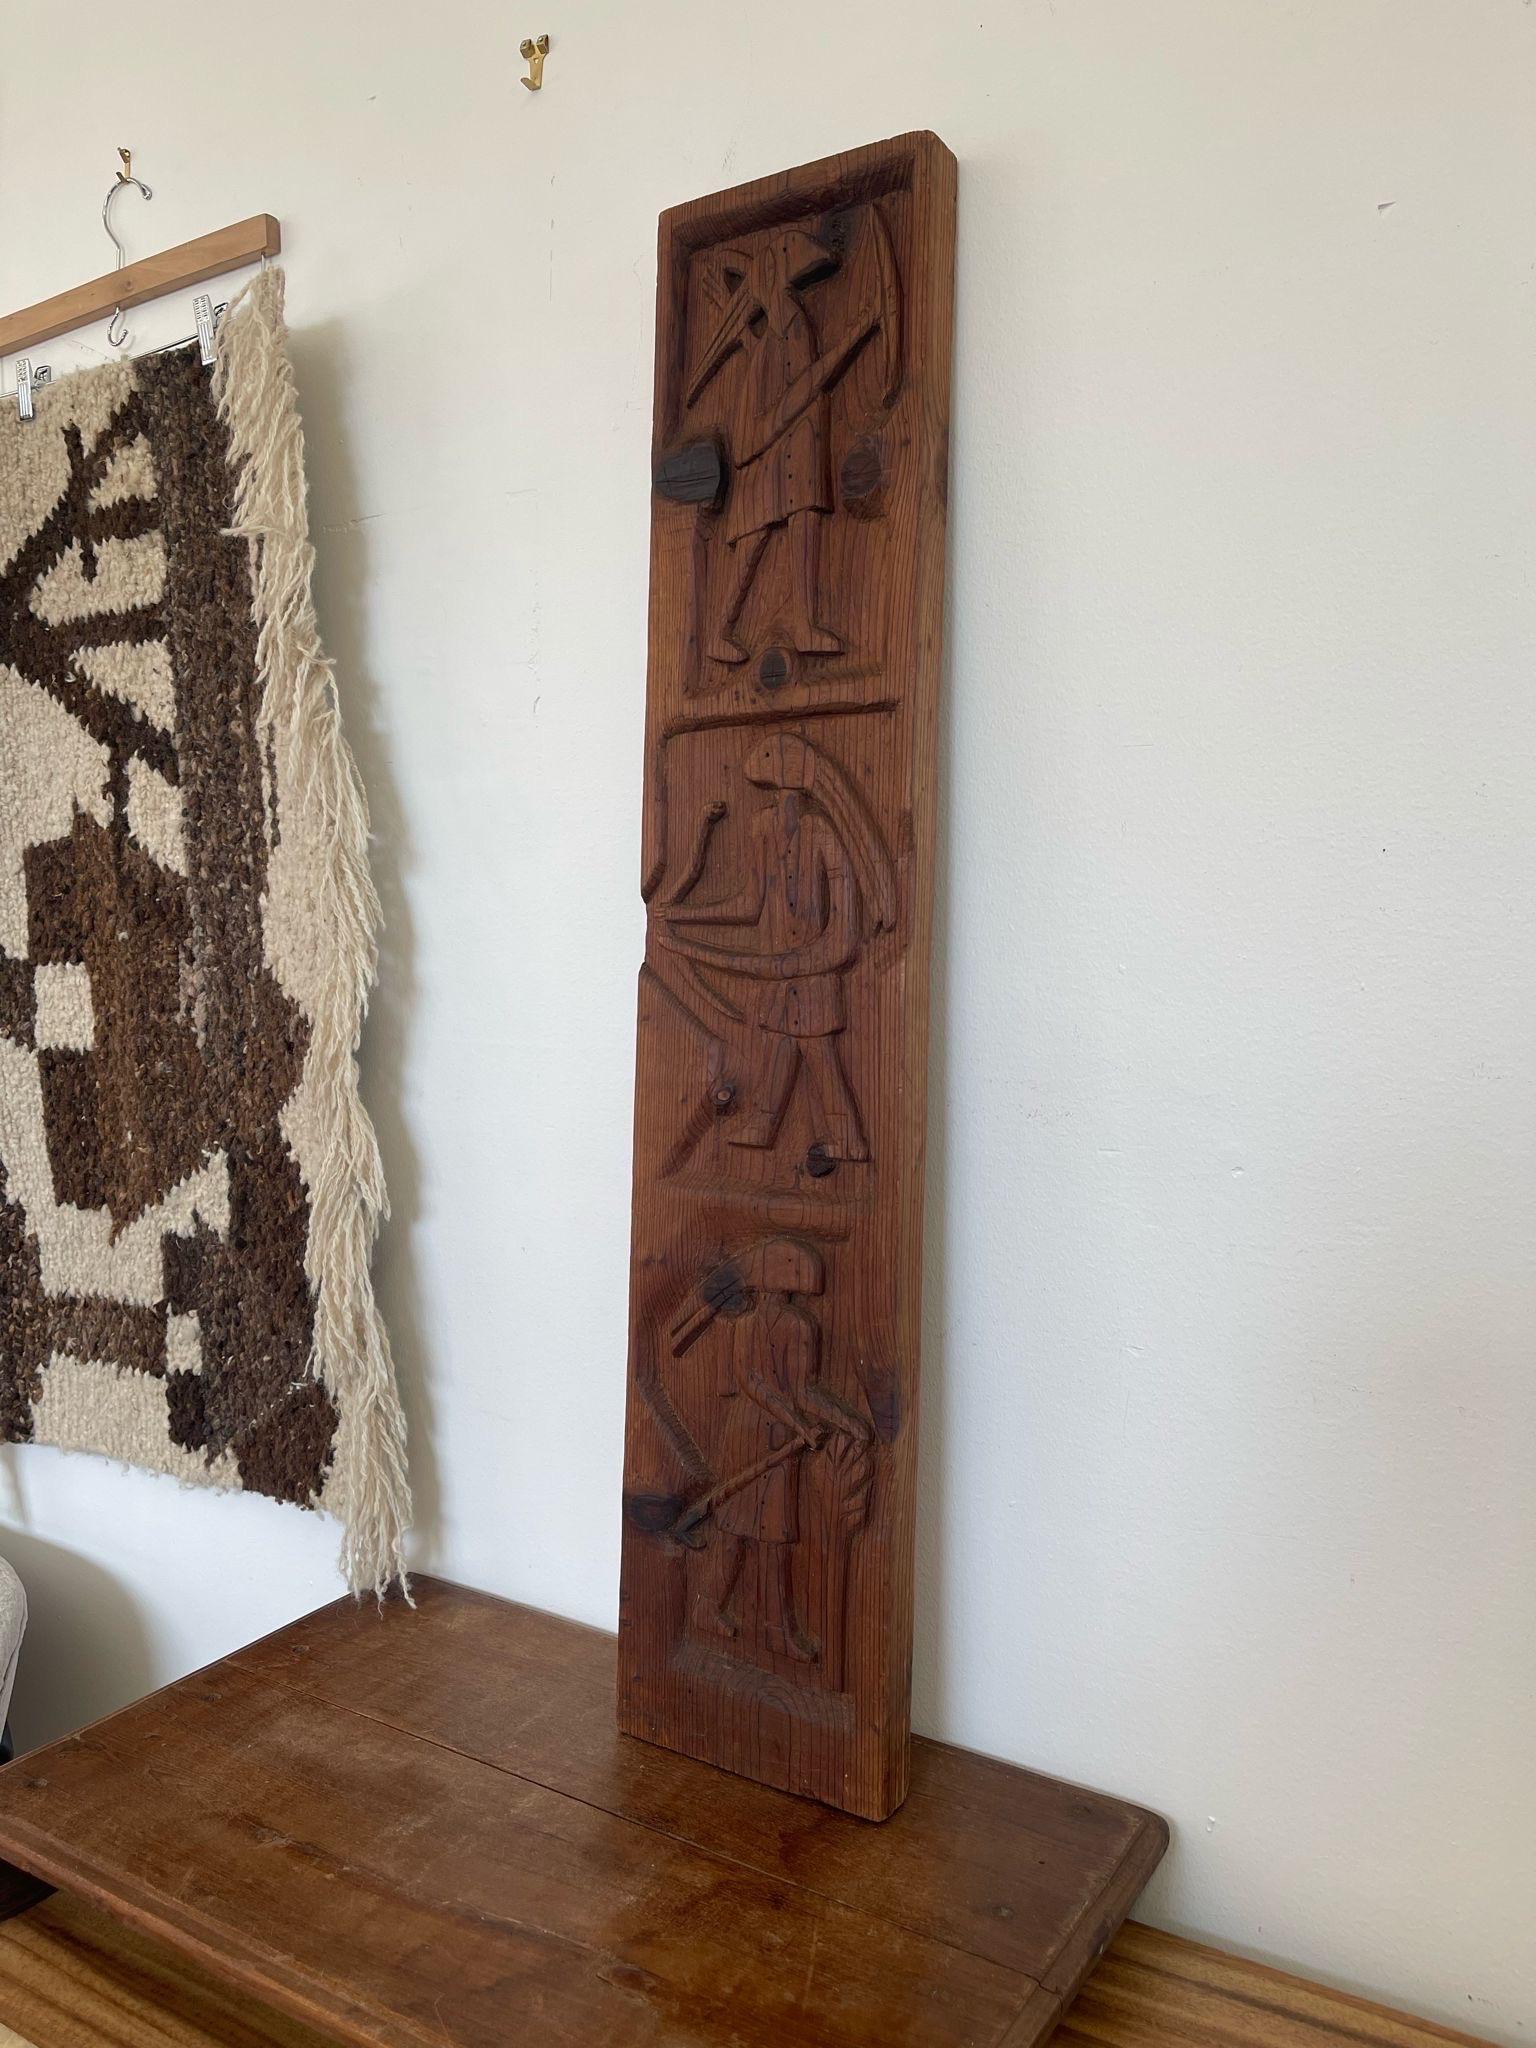 This Piece features primitive designed Carved motifs of people recessed into the wood. Walnut wood tone. Vintage Condition Consistent with Age as Pictured.

Dimensions. 7 1/2 W ; 1 1/2 D ; 37 H